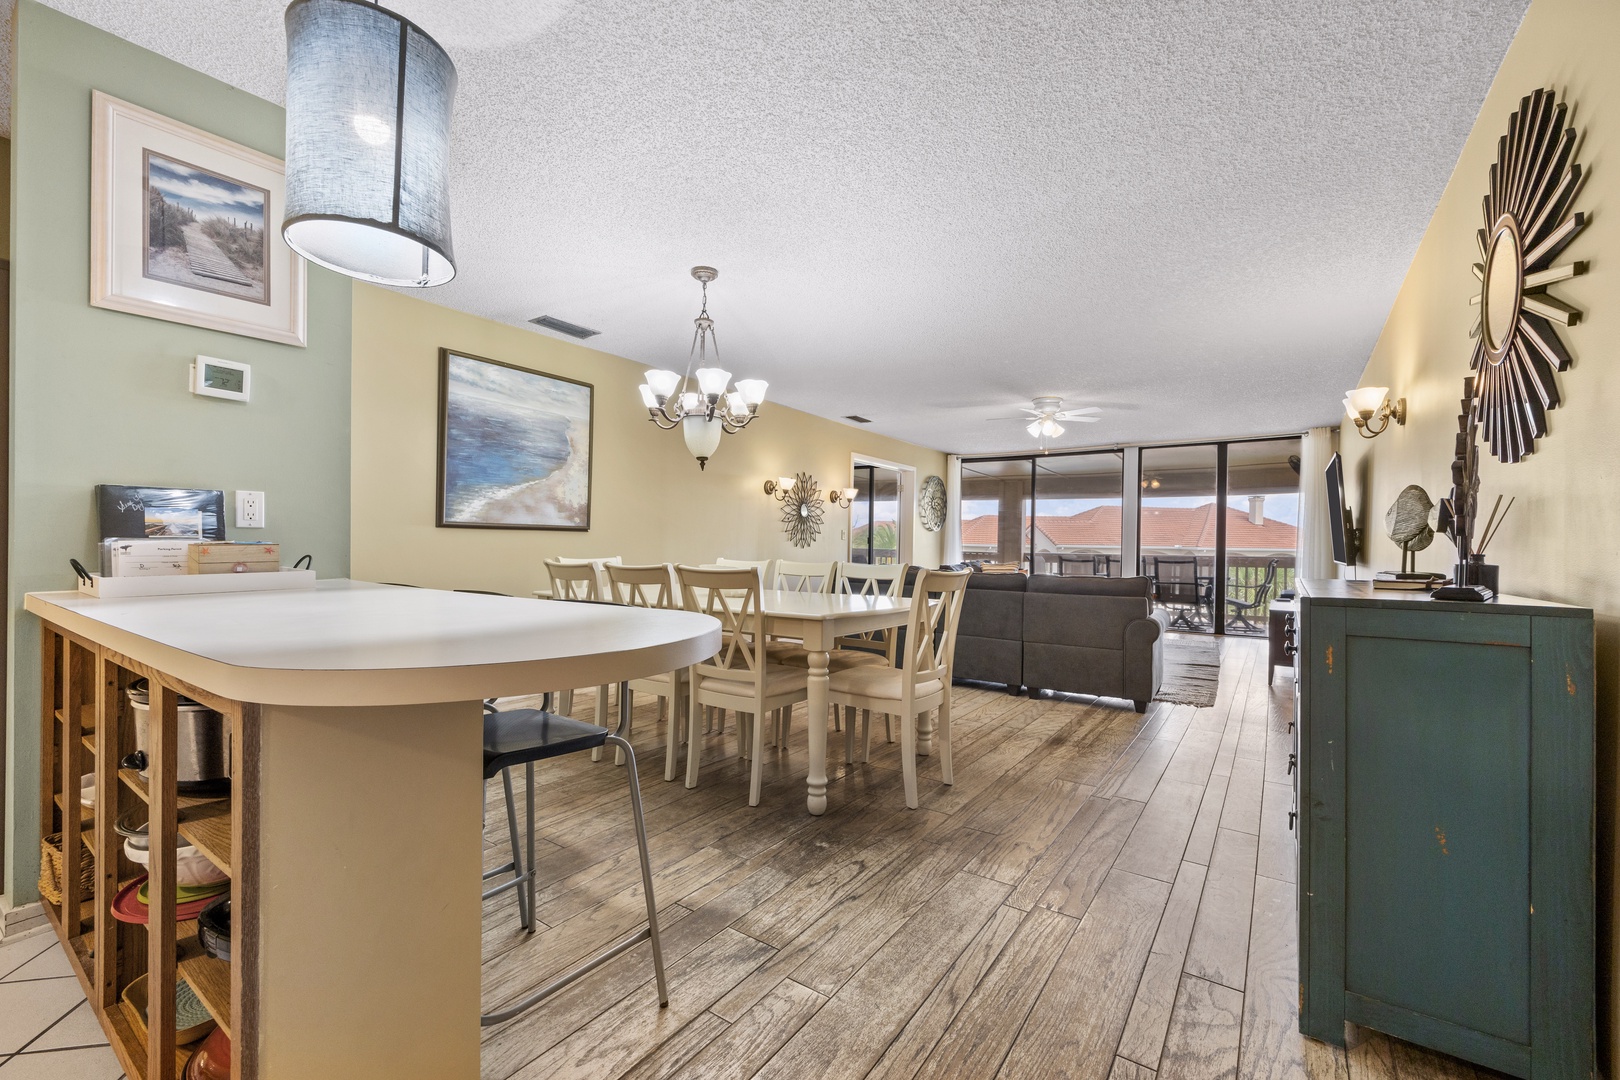 Enjoy the breezy, open layout between the kitchen and dining/living areas